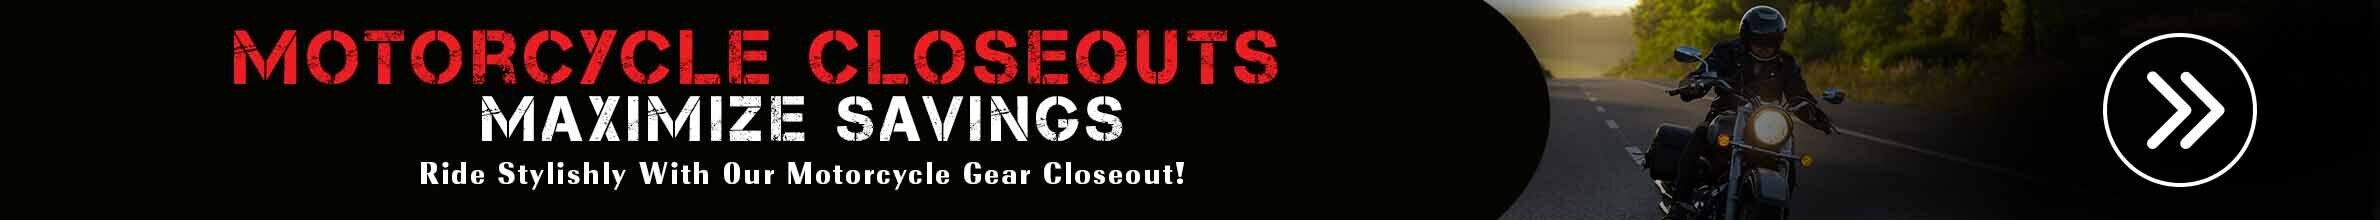 motorcycle-closeouts